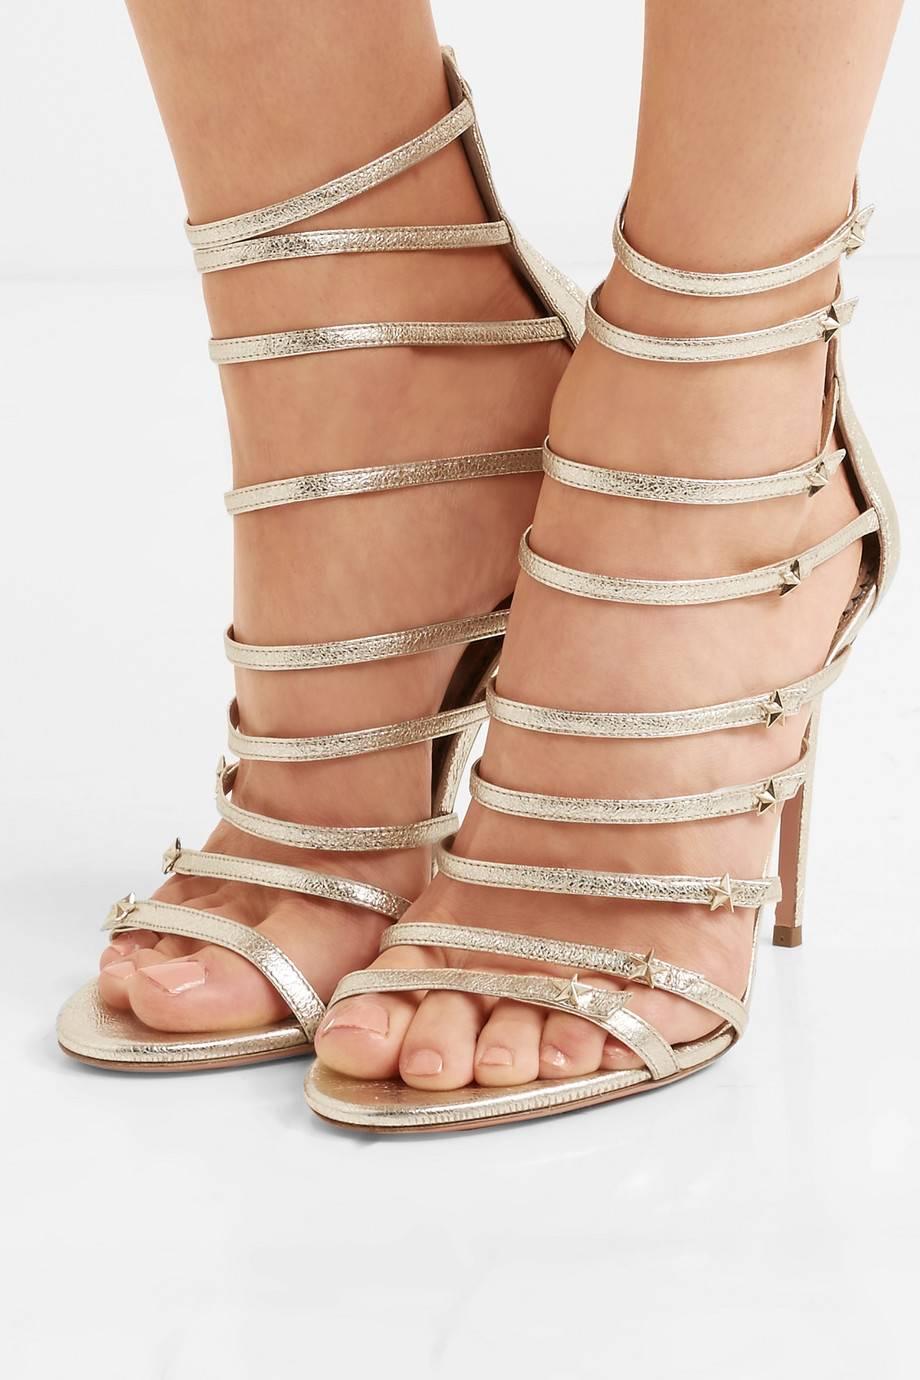 Aquazzura NEW Gold Leather Gladiator Cage Evening Sandals Heels in Box 

Size IT 36
Leather
Gold tone hardware
Ankle closure
Made in Italy
Heel height 4